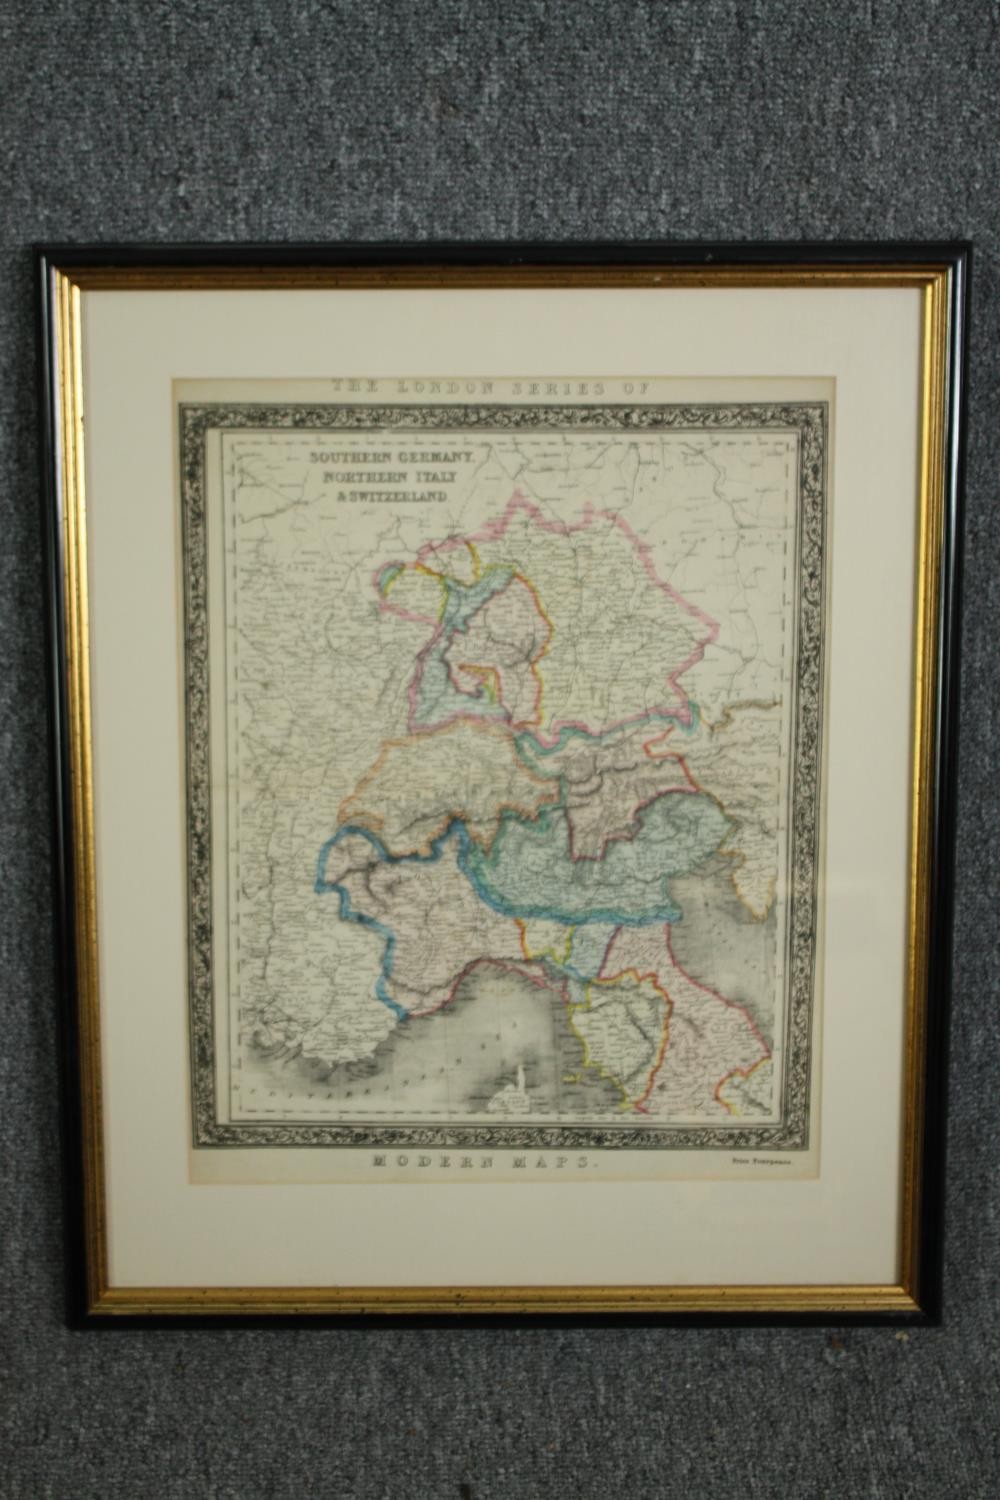 Two Engravings, 19th century hand coloured, one Palestine and the other Germany, framed and - Image 5 of 8